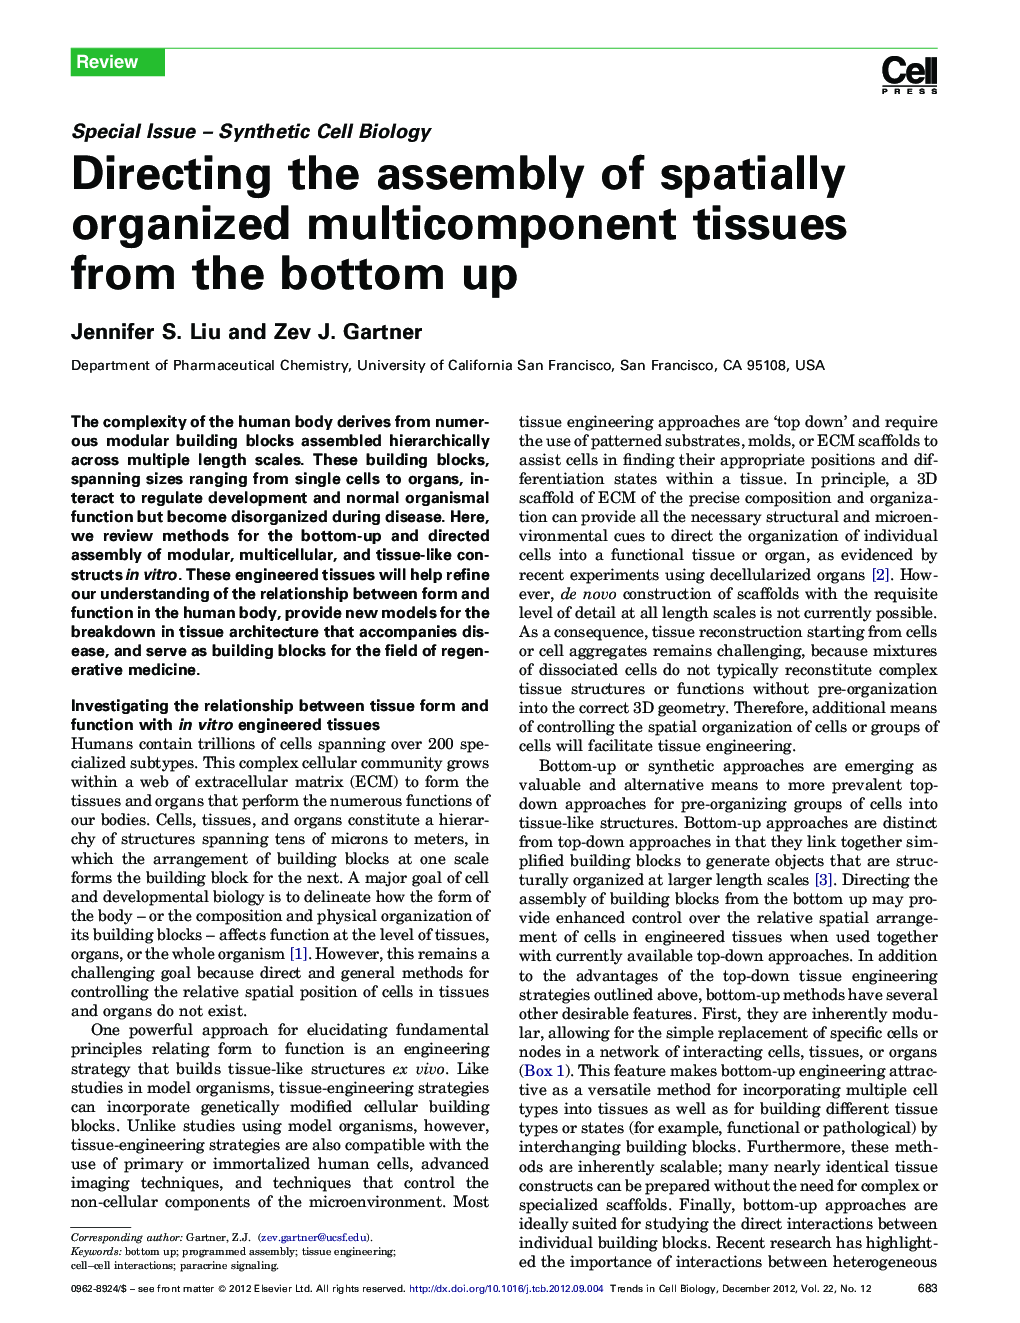 Directing the assembly of spatially organized multicomponent tissues from the bottom up